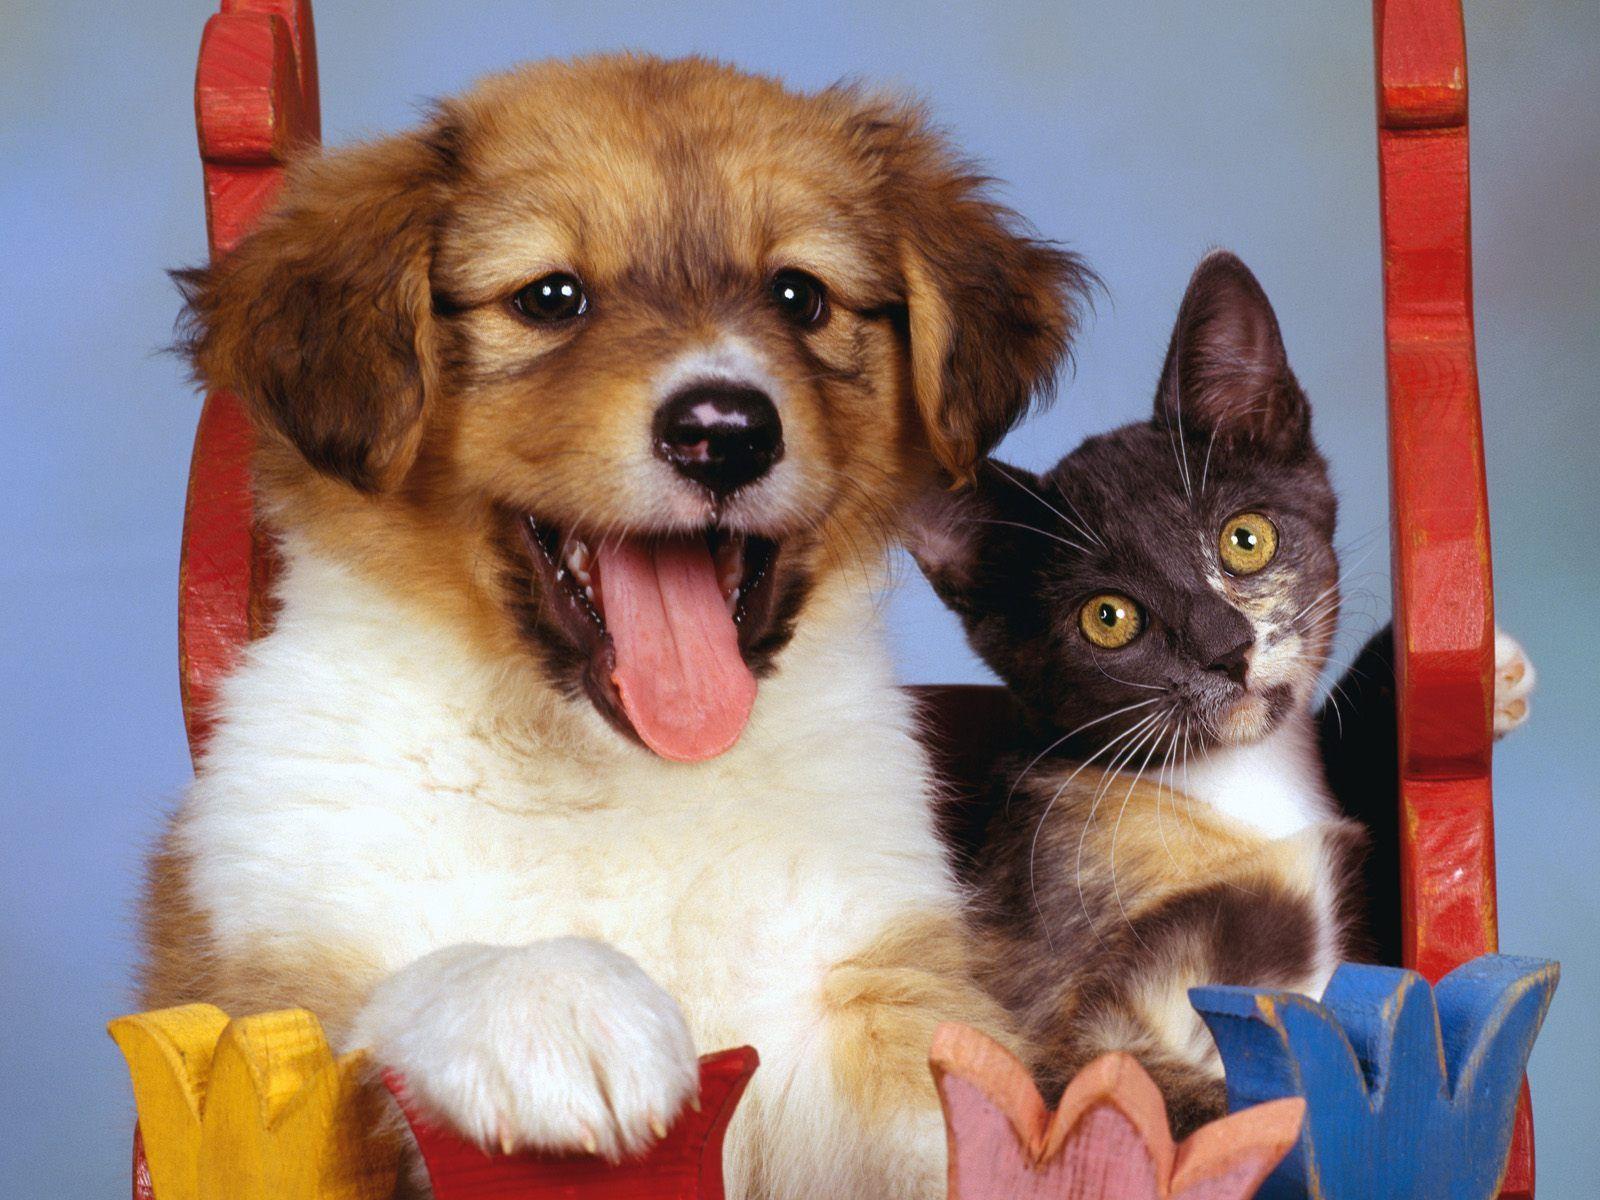 Dogs and Cats Background Wallpaper. High Quality Wallpaper